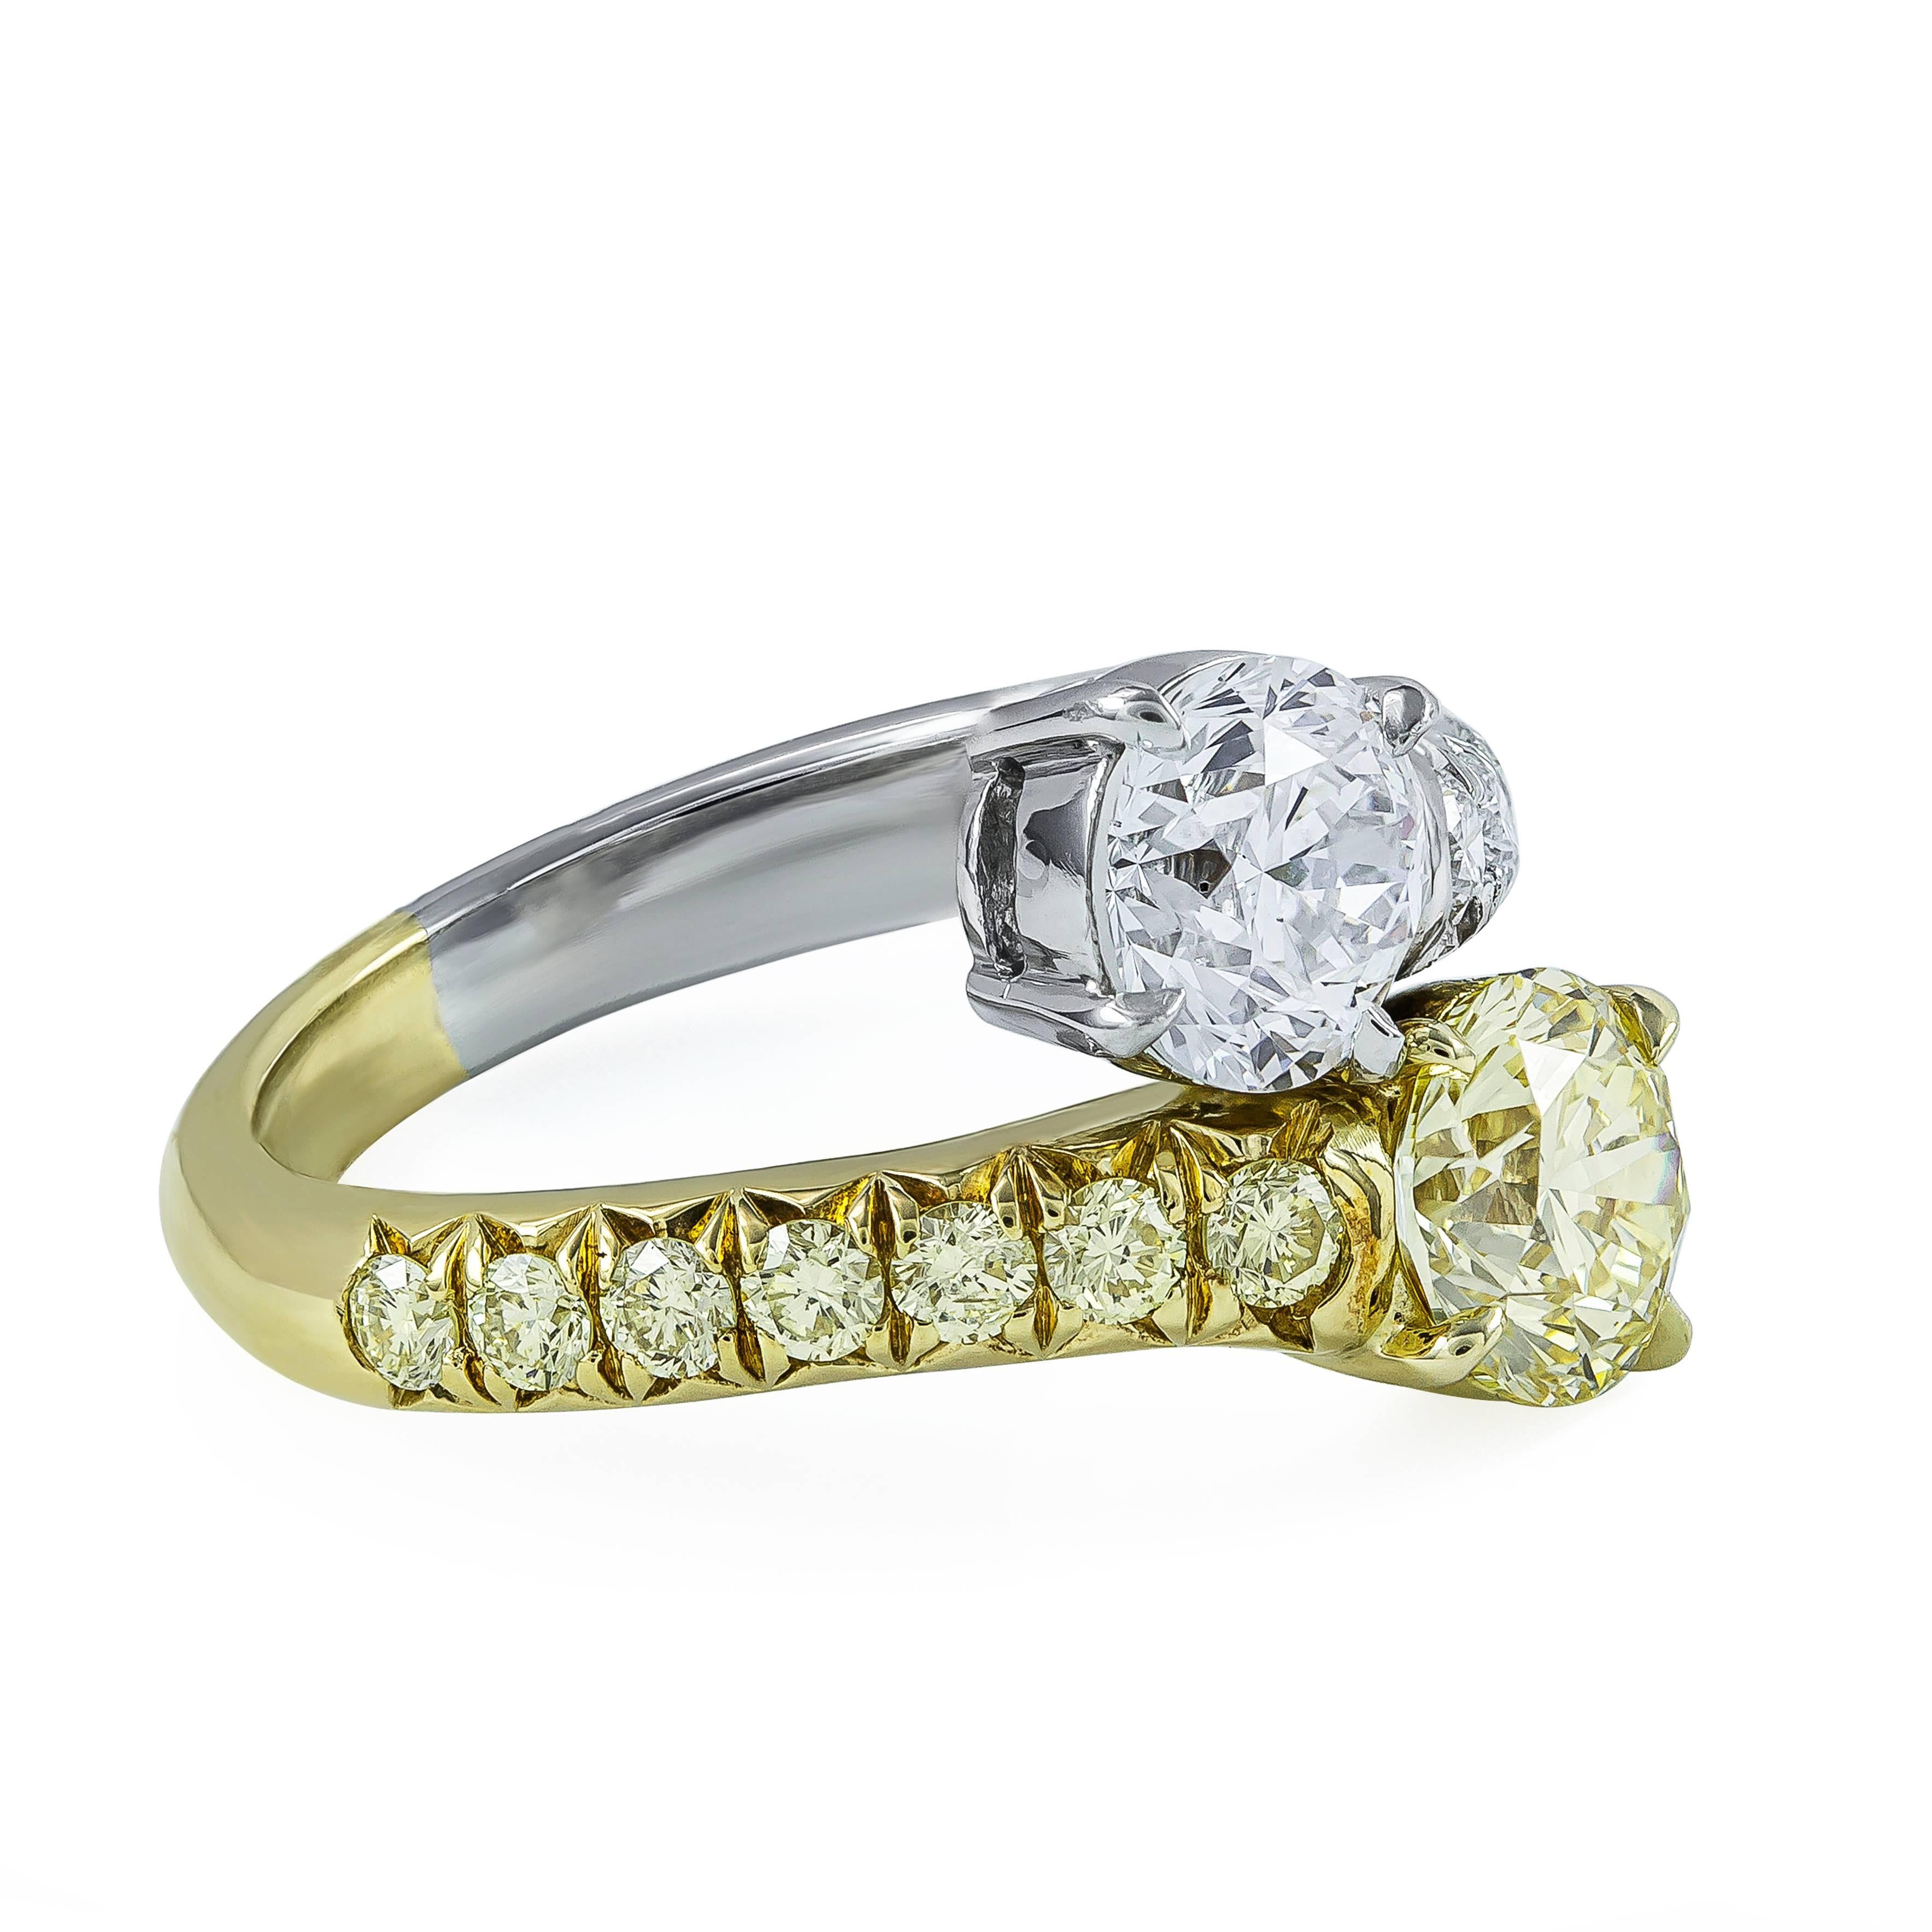 A very chic and fashionable ring showcasing yellow and white round  diamond engagement ring. Features a 1.01 carat yellow round diamond that GIA certified as Fancy Light Yellow color, VS2 clarity, intertwined with a carat dazzling round white